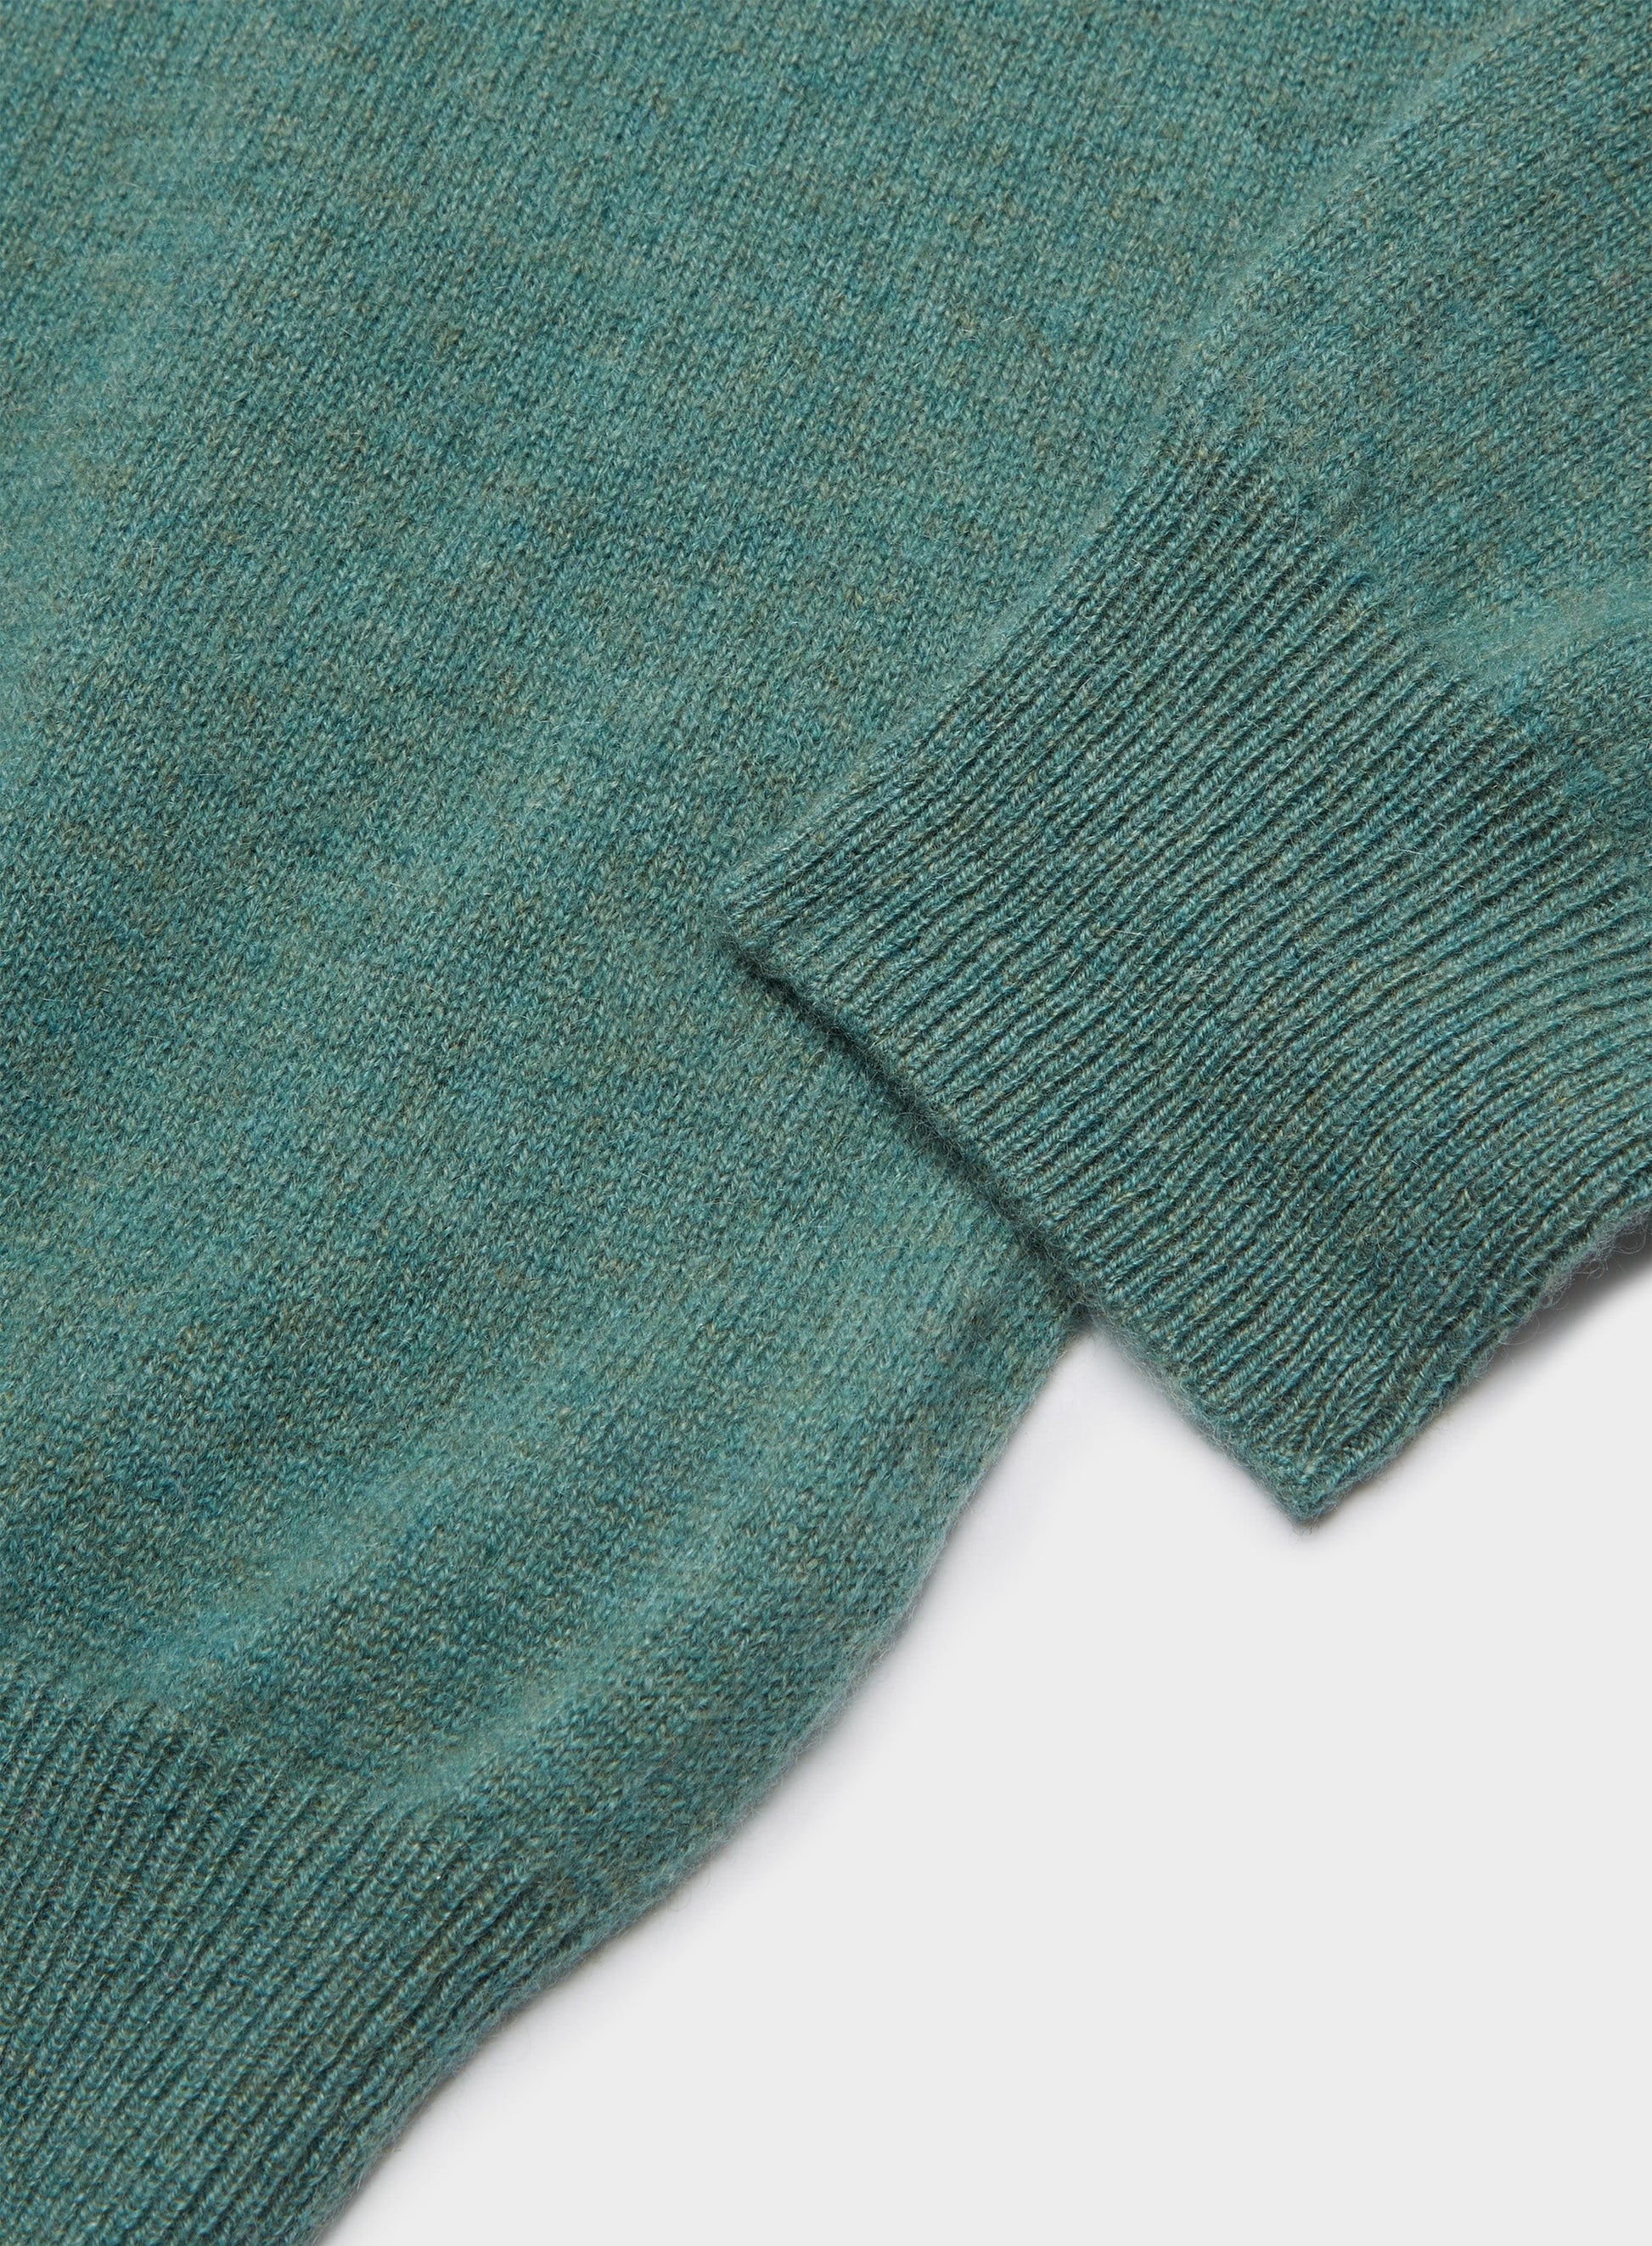 Mens Cashmere 1/4 Zip Jumper in Green - Oxford Shirt Co.